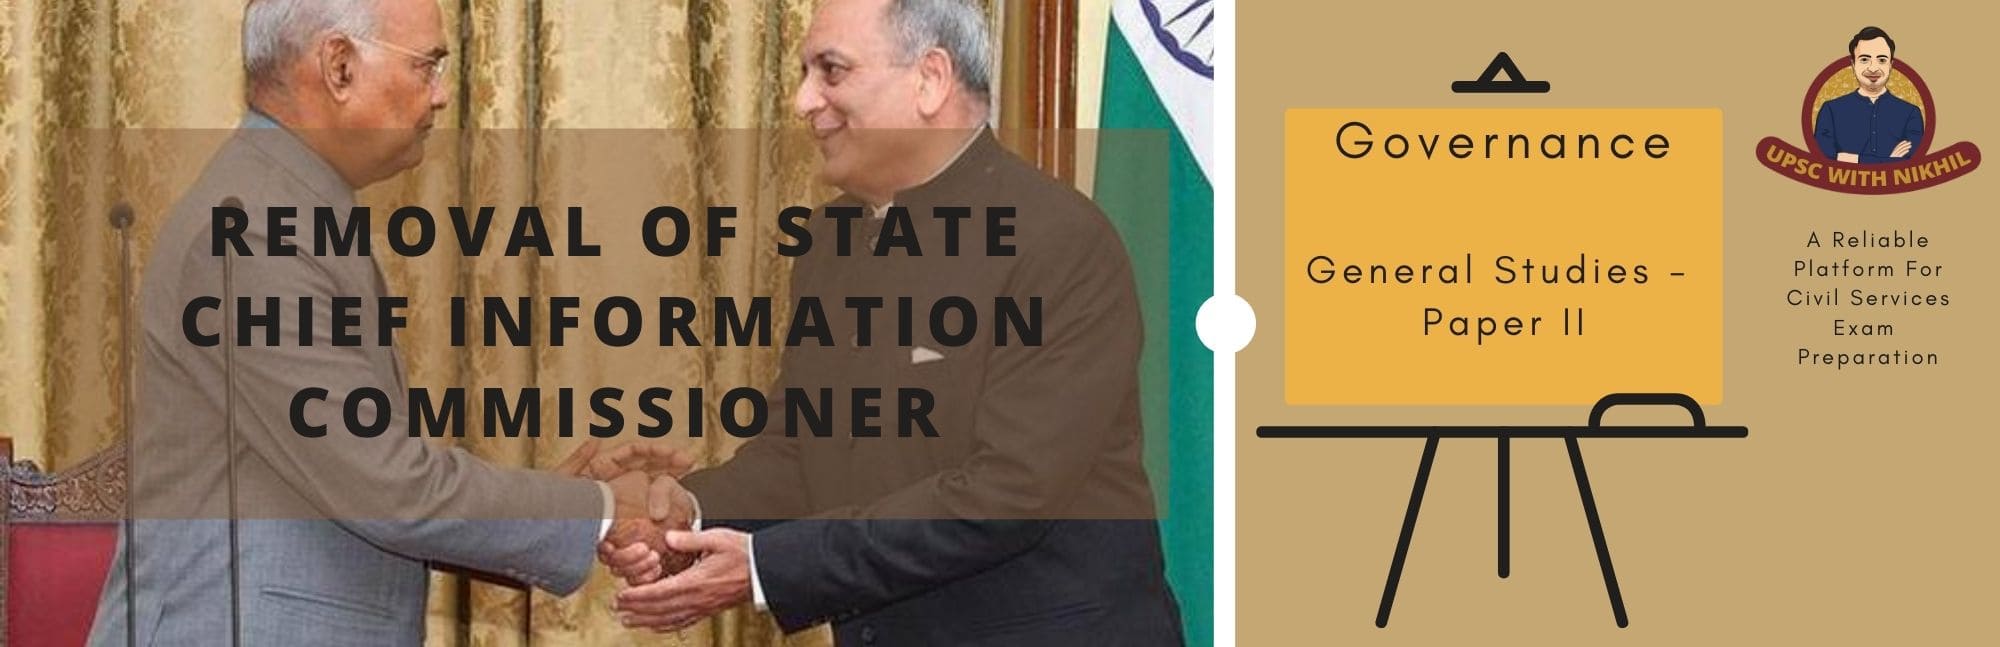 Removal of State Chief Information Commissioner